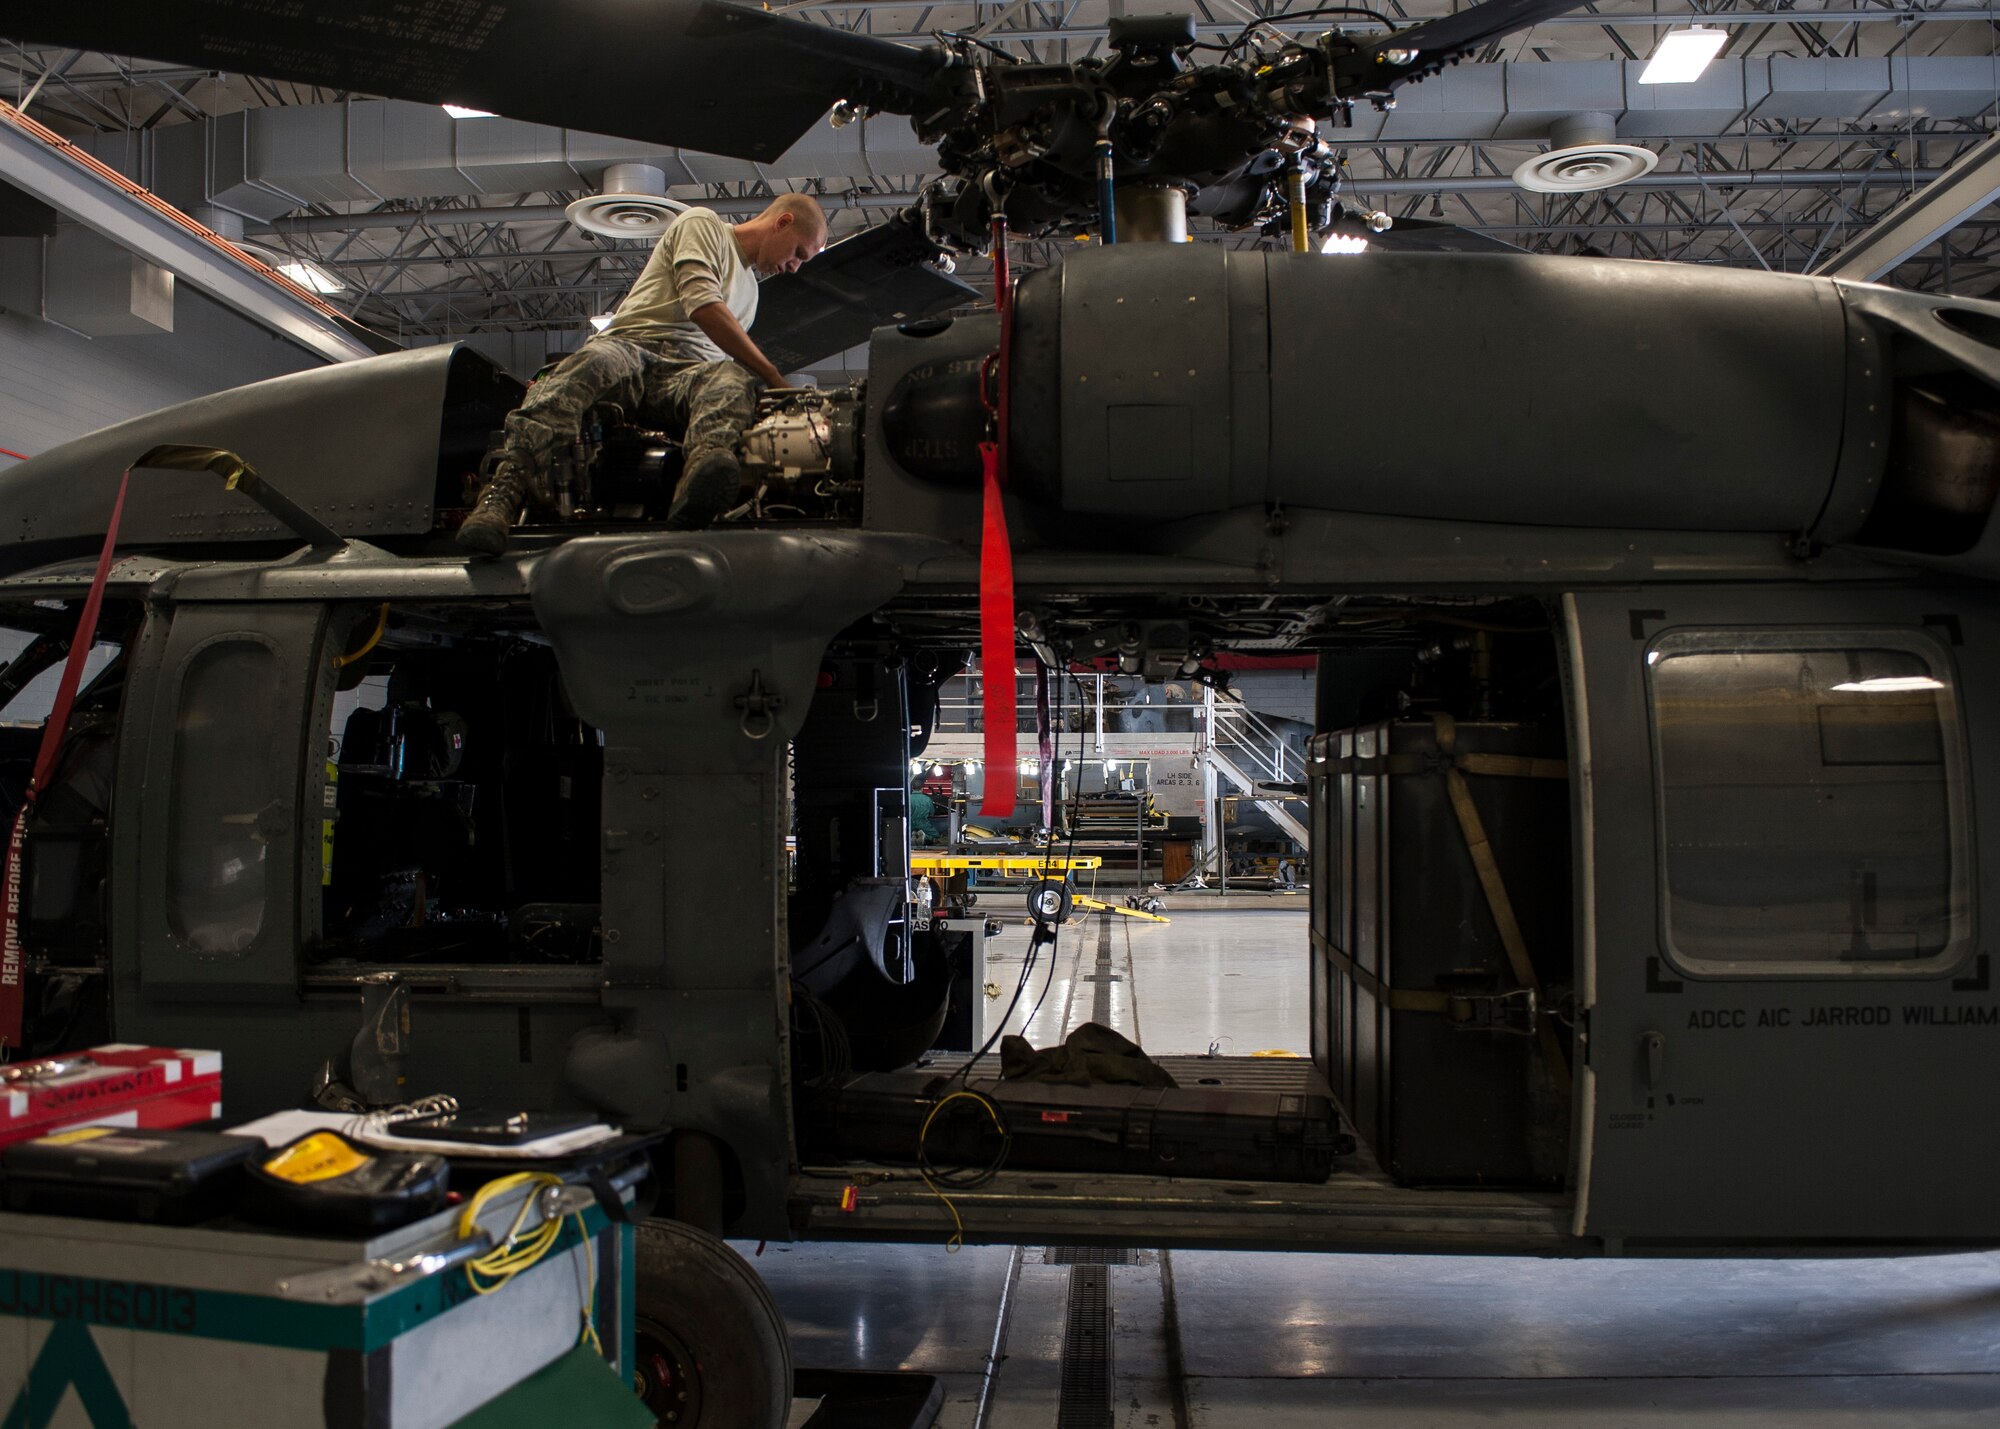 Senior Airman Jacob Crain, 823rd Maintenance Squadron crew chief, performs a torque check on a main gear box on an HH-60G Pave Hawk at Nellis Air Force Base, Nev., Nov. 10, 2015. Airmen at the 823rd MXS are capable of performing intermediate, organizational and depot level maintenance on HH-60 helicopters. (U.S. Air Force photo by Staff Sgt. Siuta B. Ika)